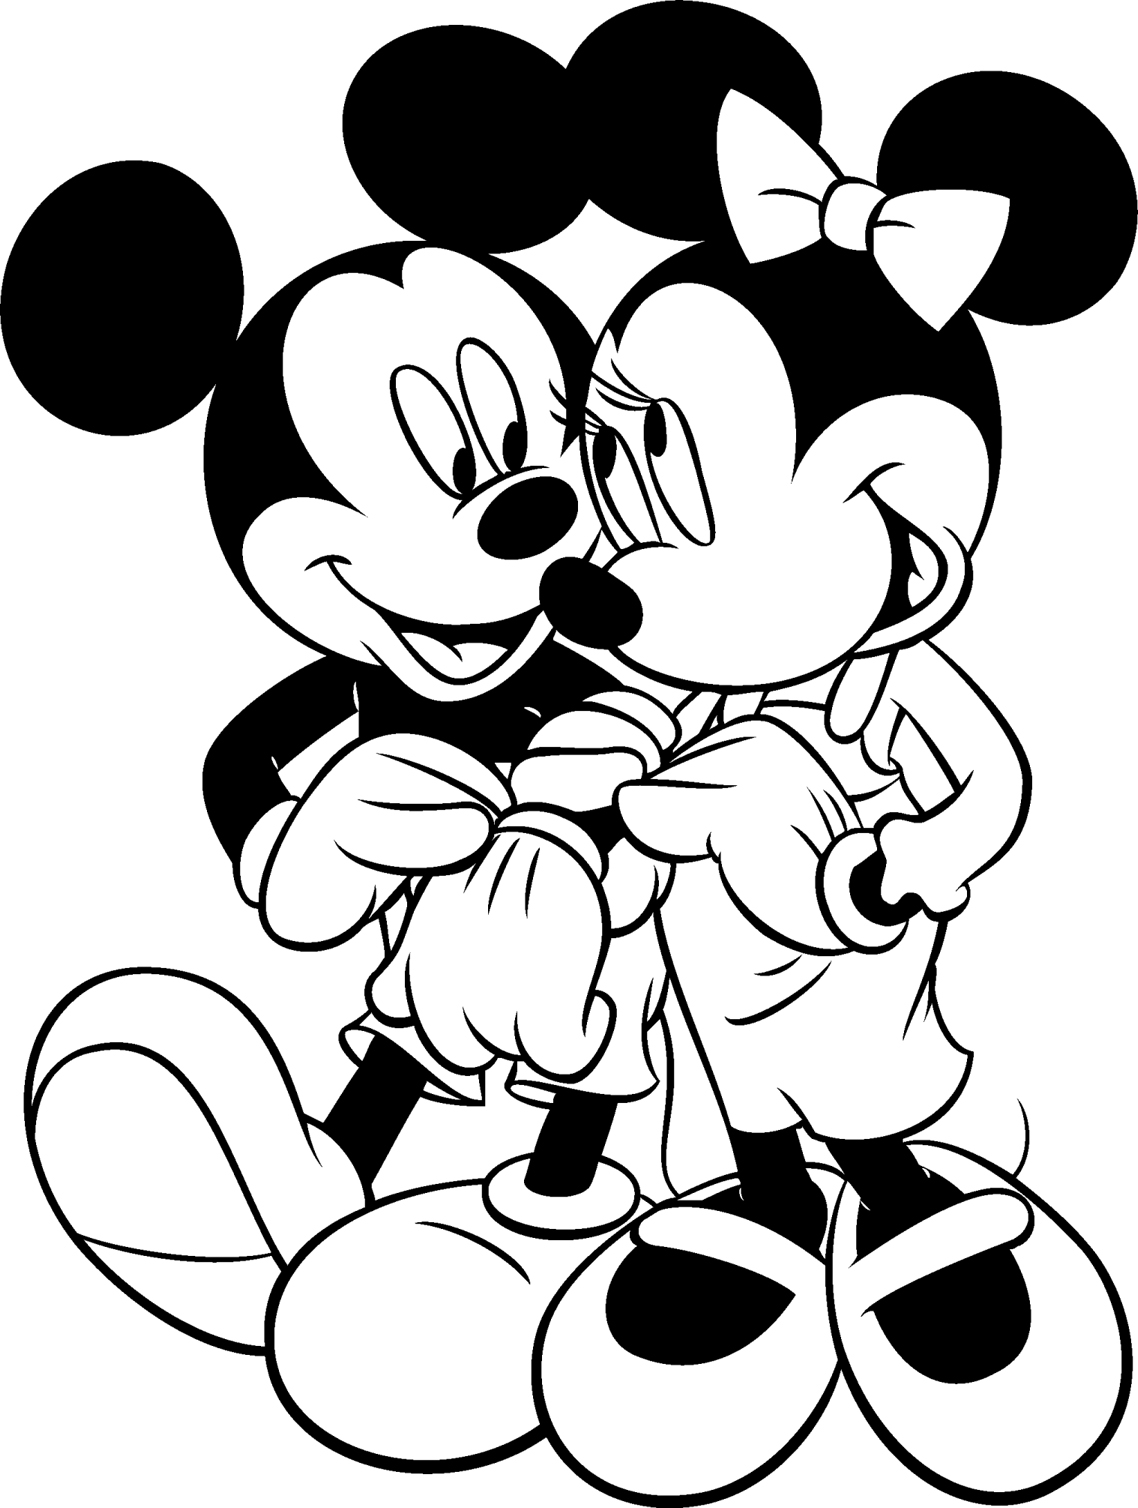 Free Download Mouse Clubhouse Colouring Pages Mickey Clubhouse Coloring Sheets House 1138x1508 For Your Desktop Mobile Tablet Explore 49 Coloring Wallpaper For Home Cheap Wallpaper Picture Wallpaper For Home